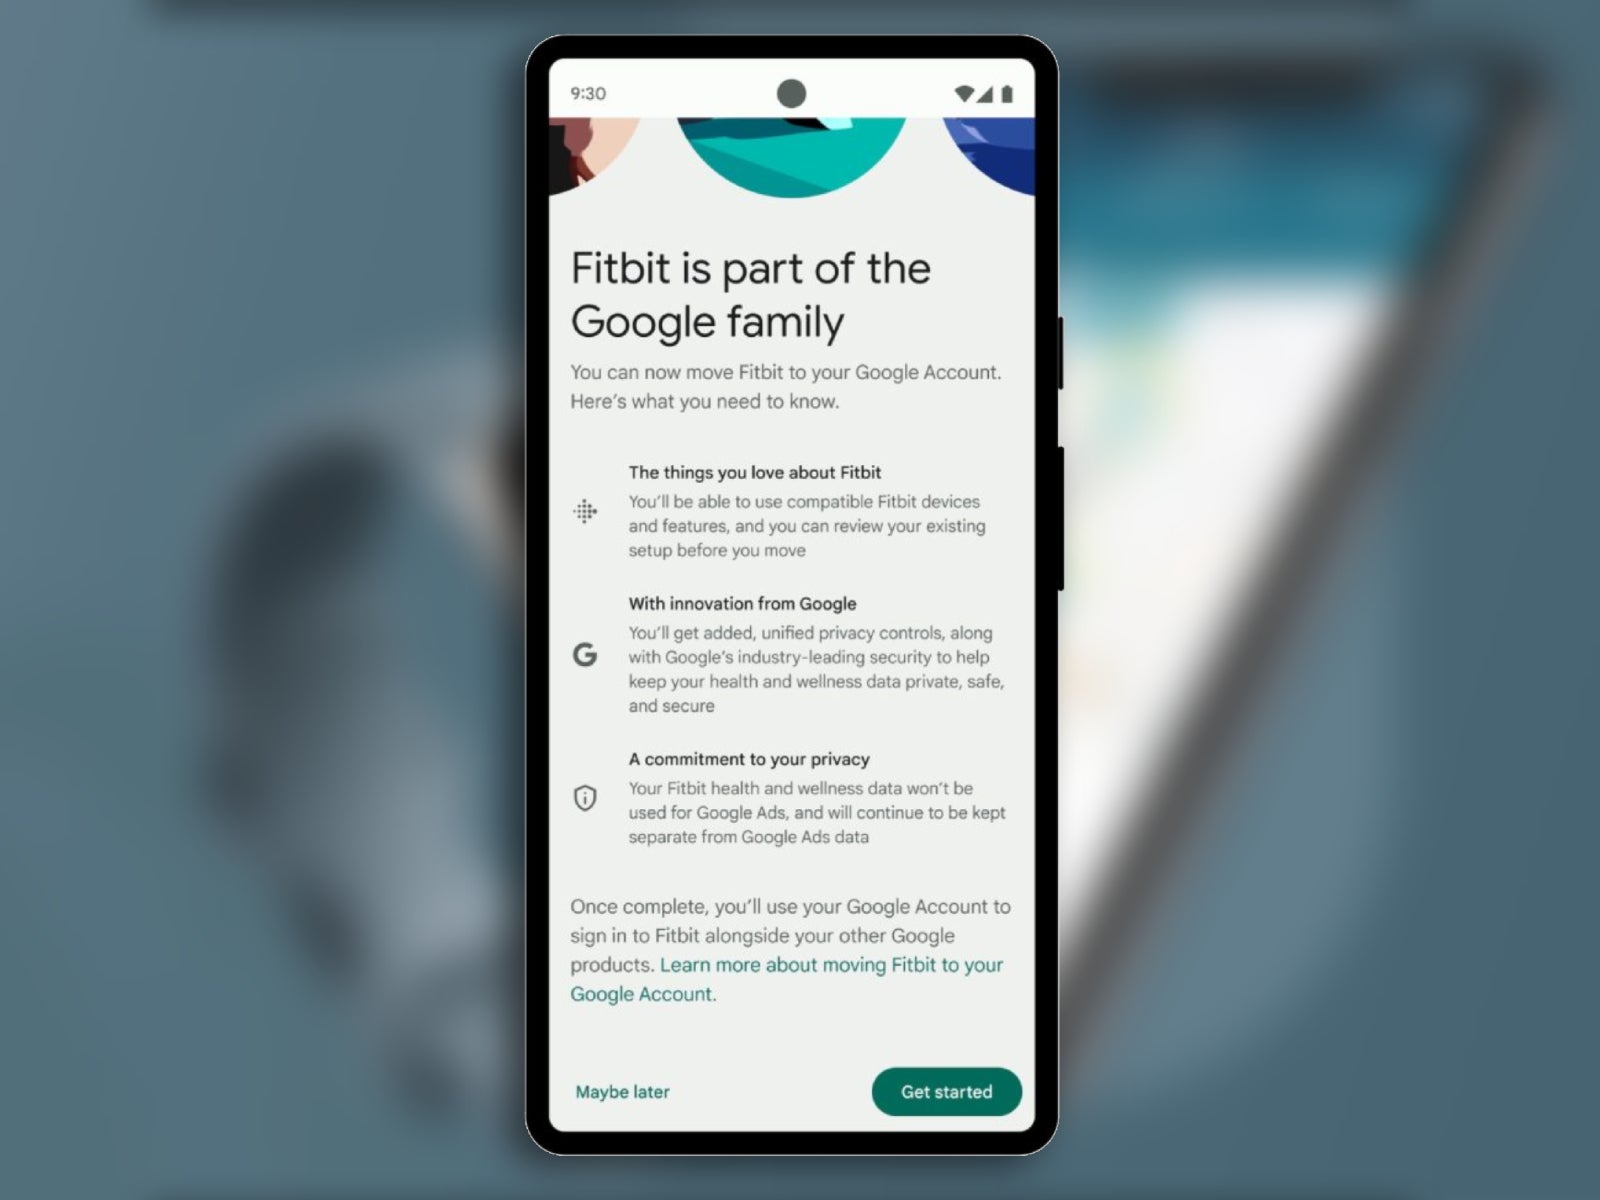 An example screenshot for the upcoming migration process. - Fitbit will migrate to logins through Google accounts this summer